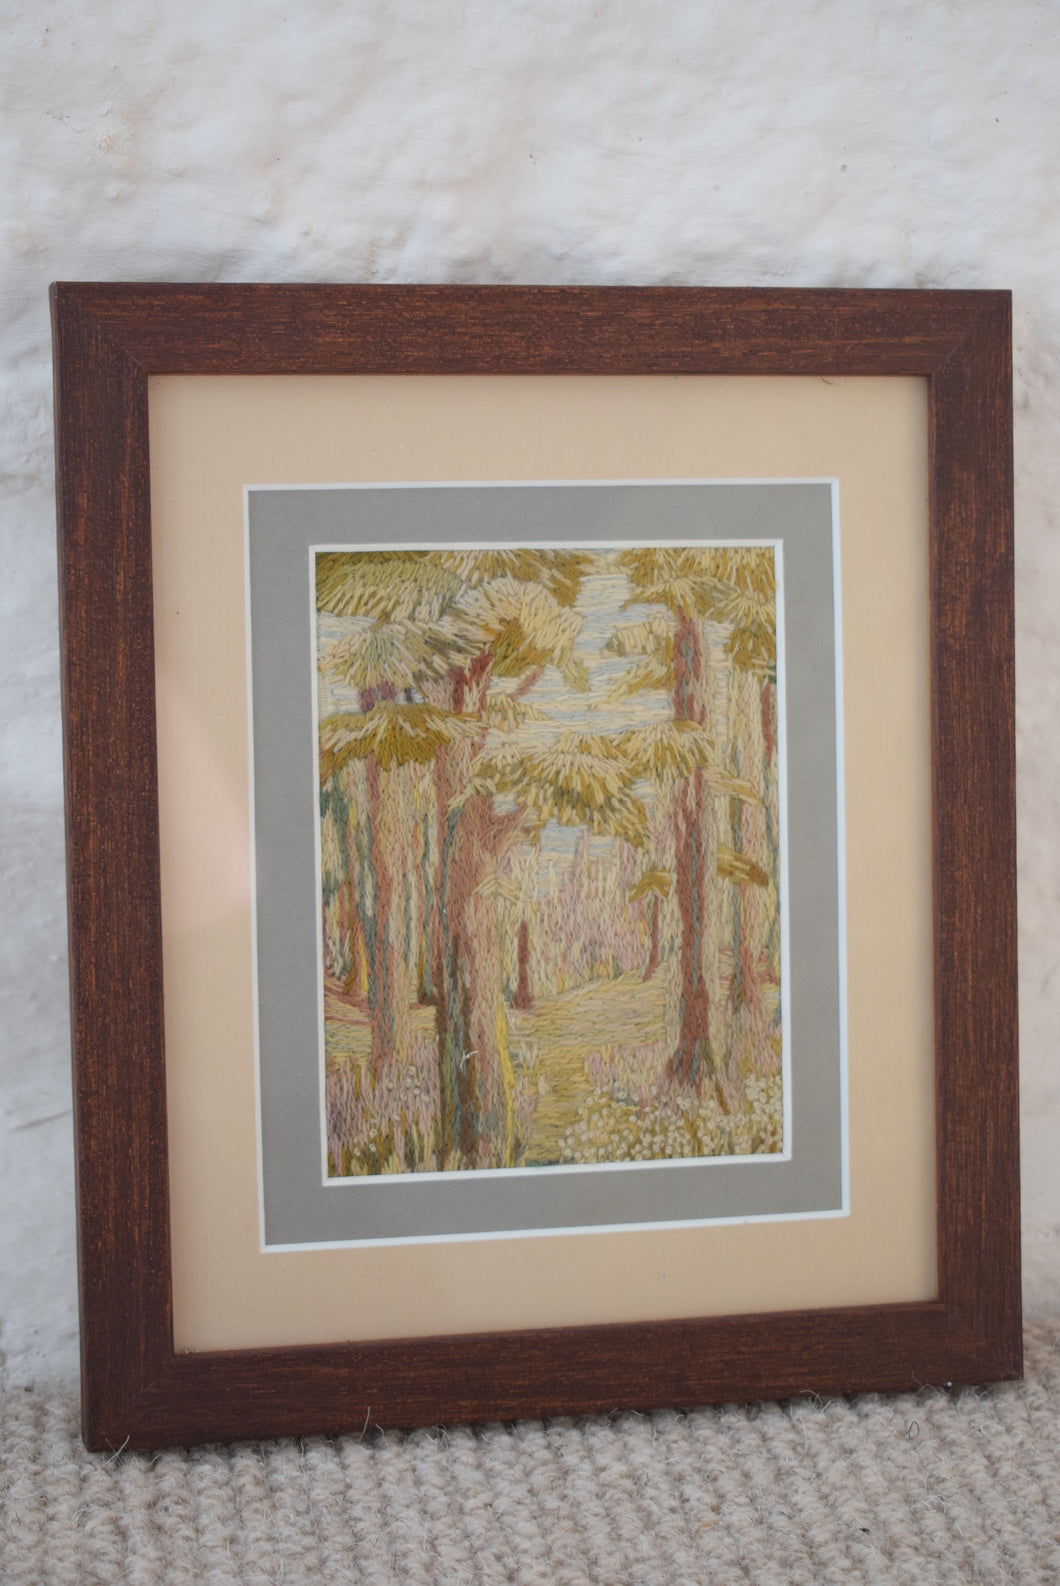 embroidery of a woodland scene